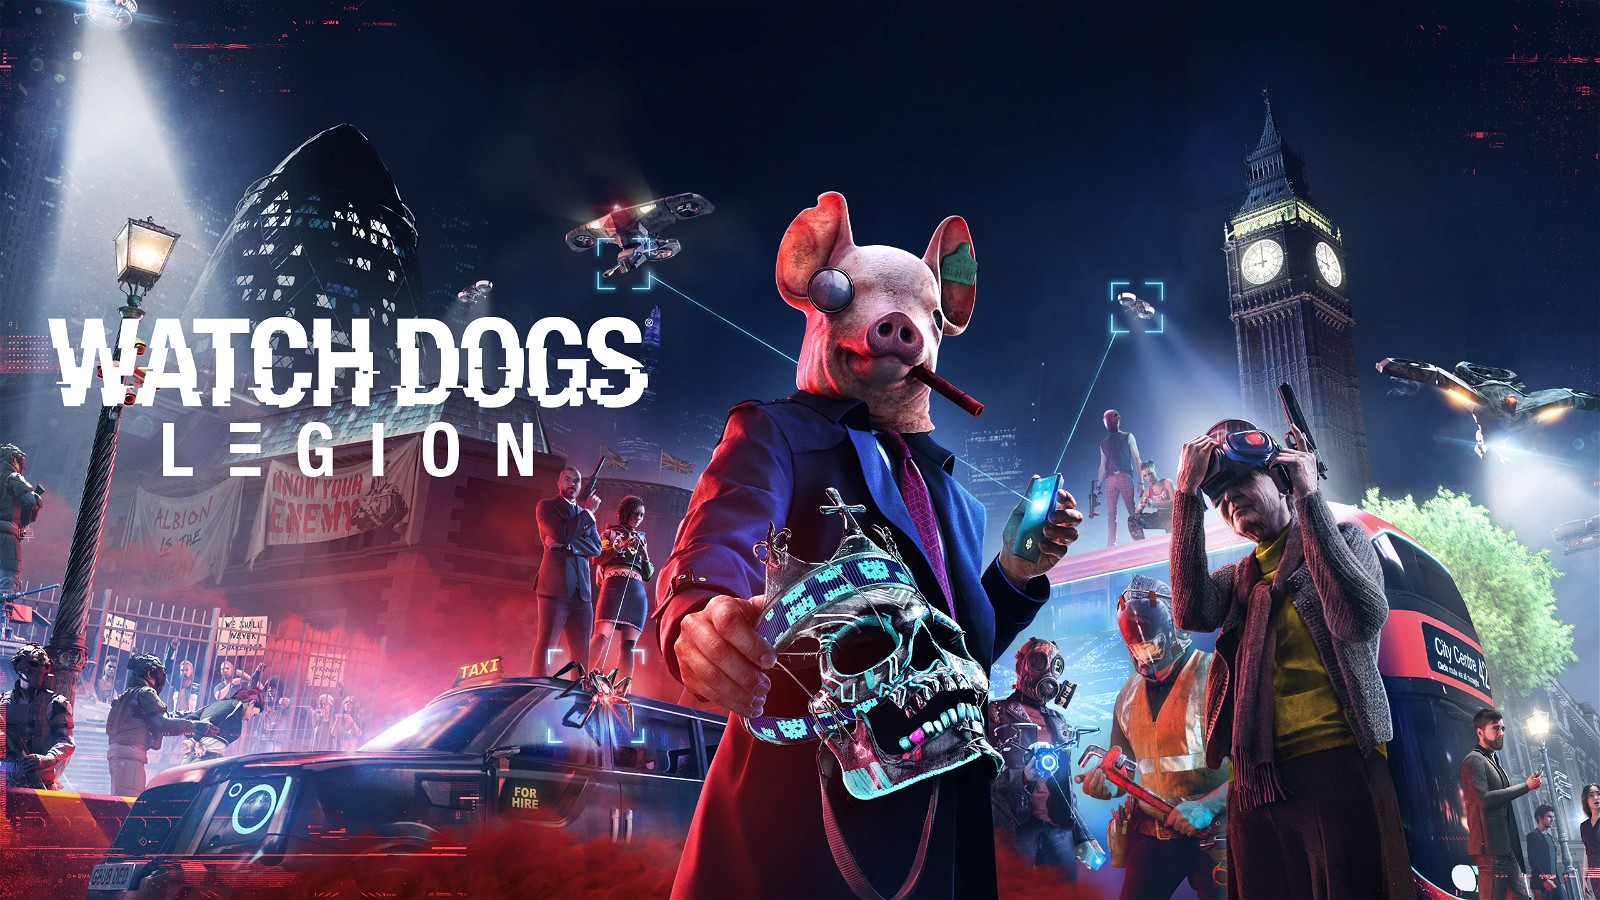 Promotional for Ubisoft's Watch Dogs: Legion